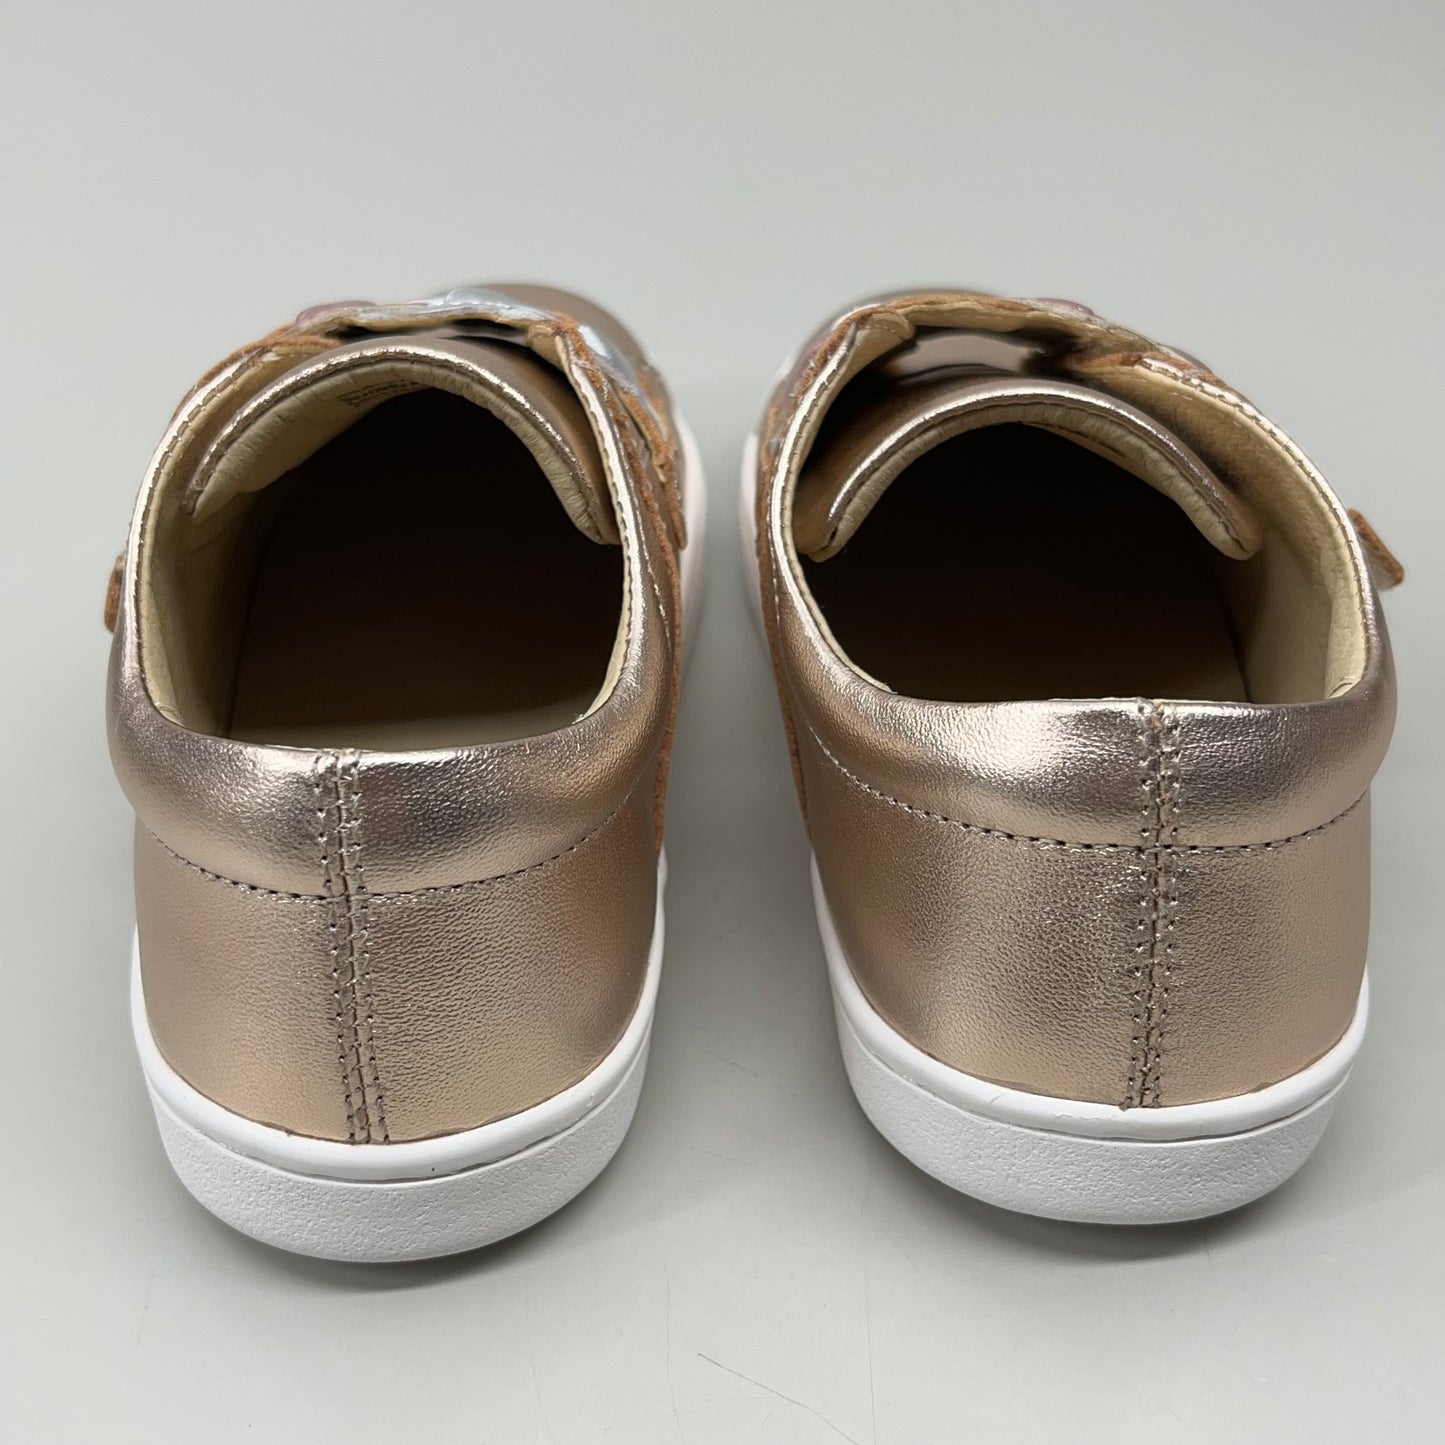 OLD SOLES Igster Sneakers Kid's Leather Shoe Sz 30 US 13 Copper/ Silver/ Pink Frost #6132